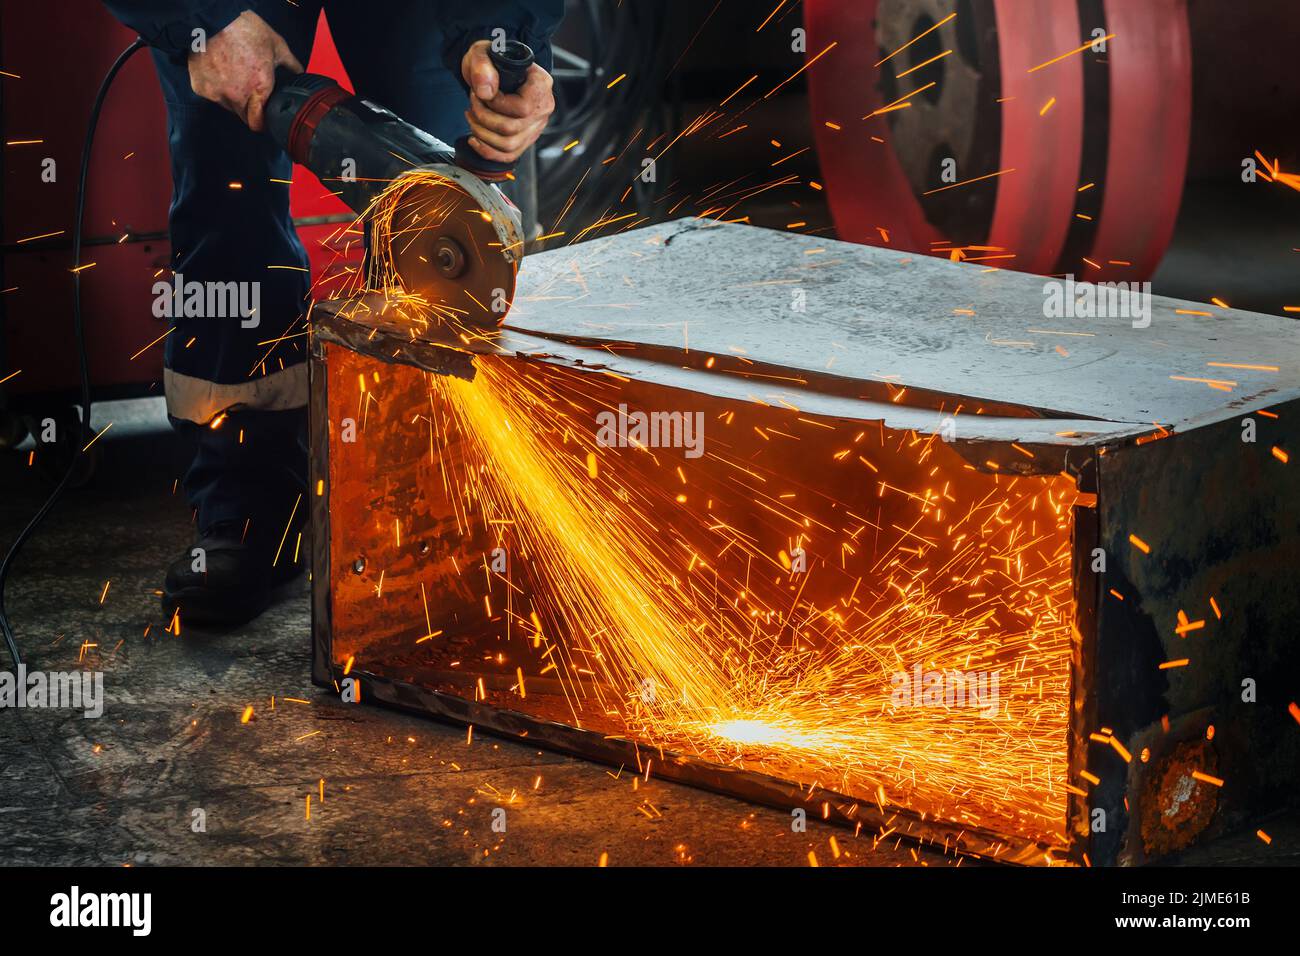 A worker cuts metal with a hand grinder in the production shop and bright sparks fly. A genuine working environment. Stock Photo